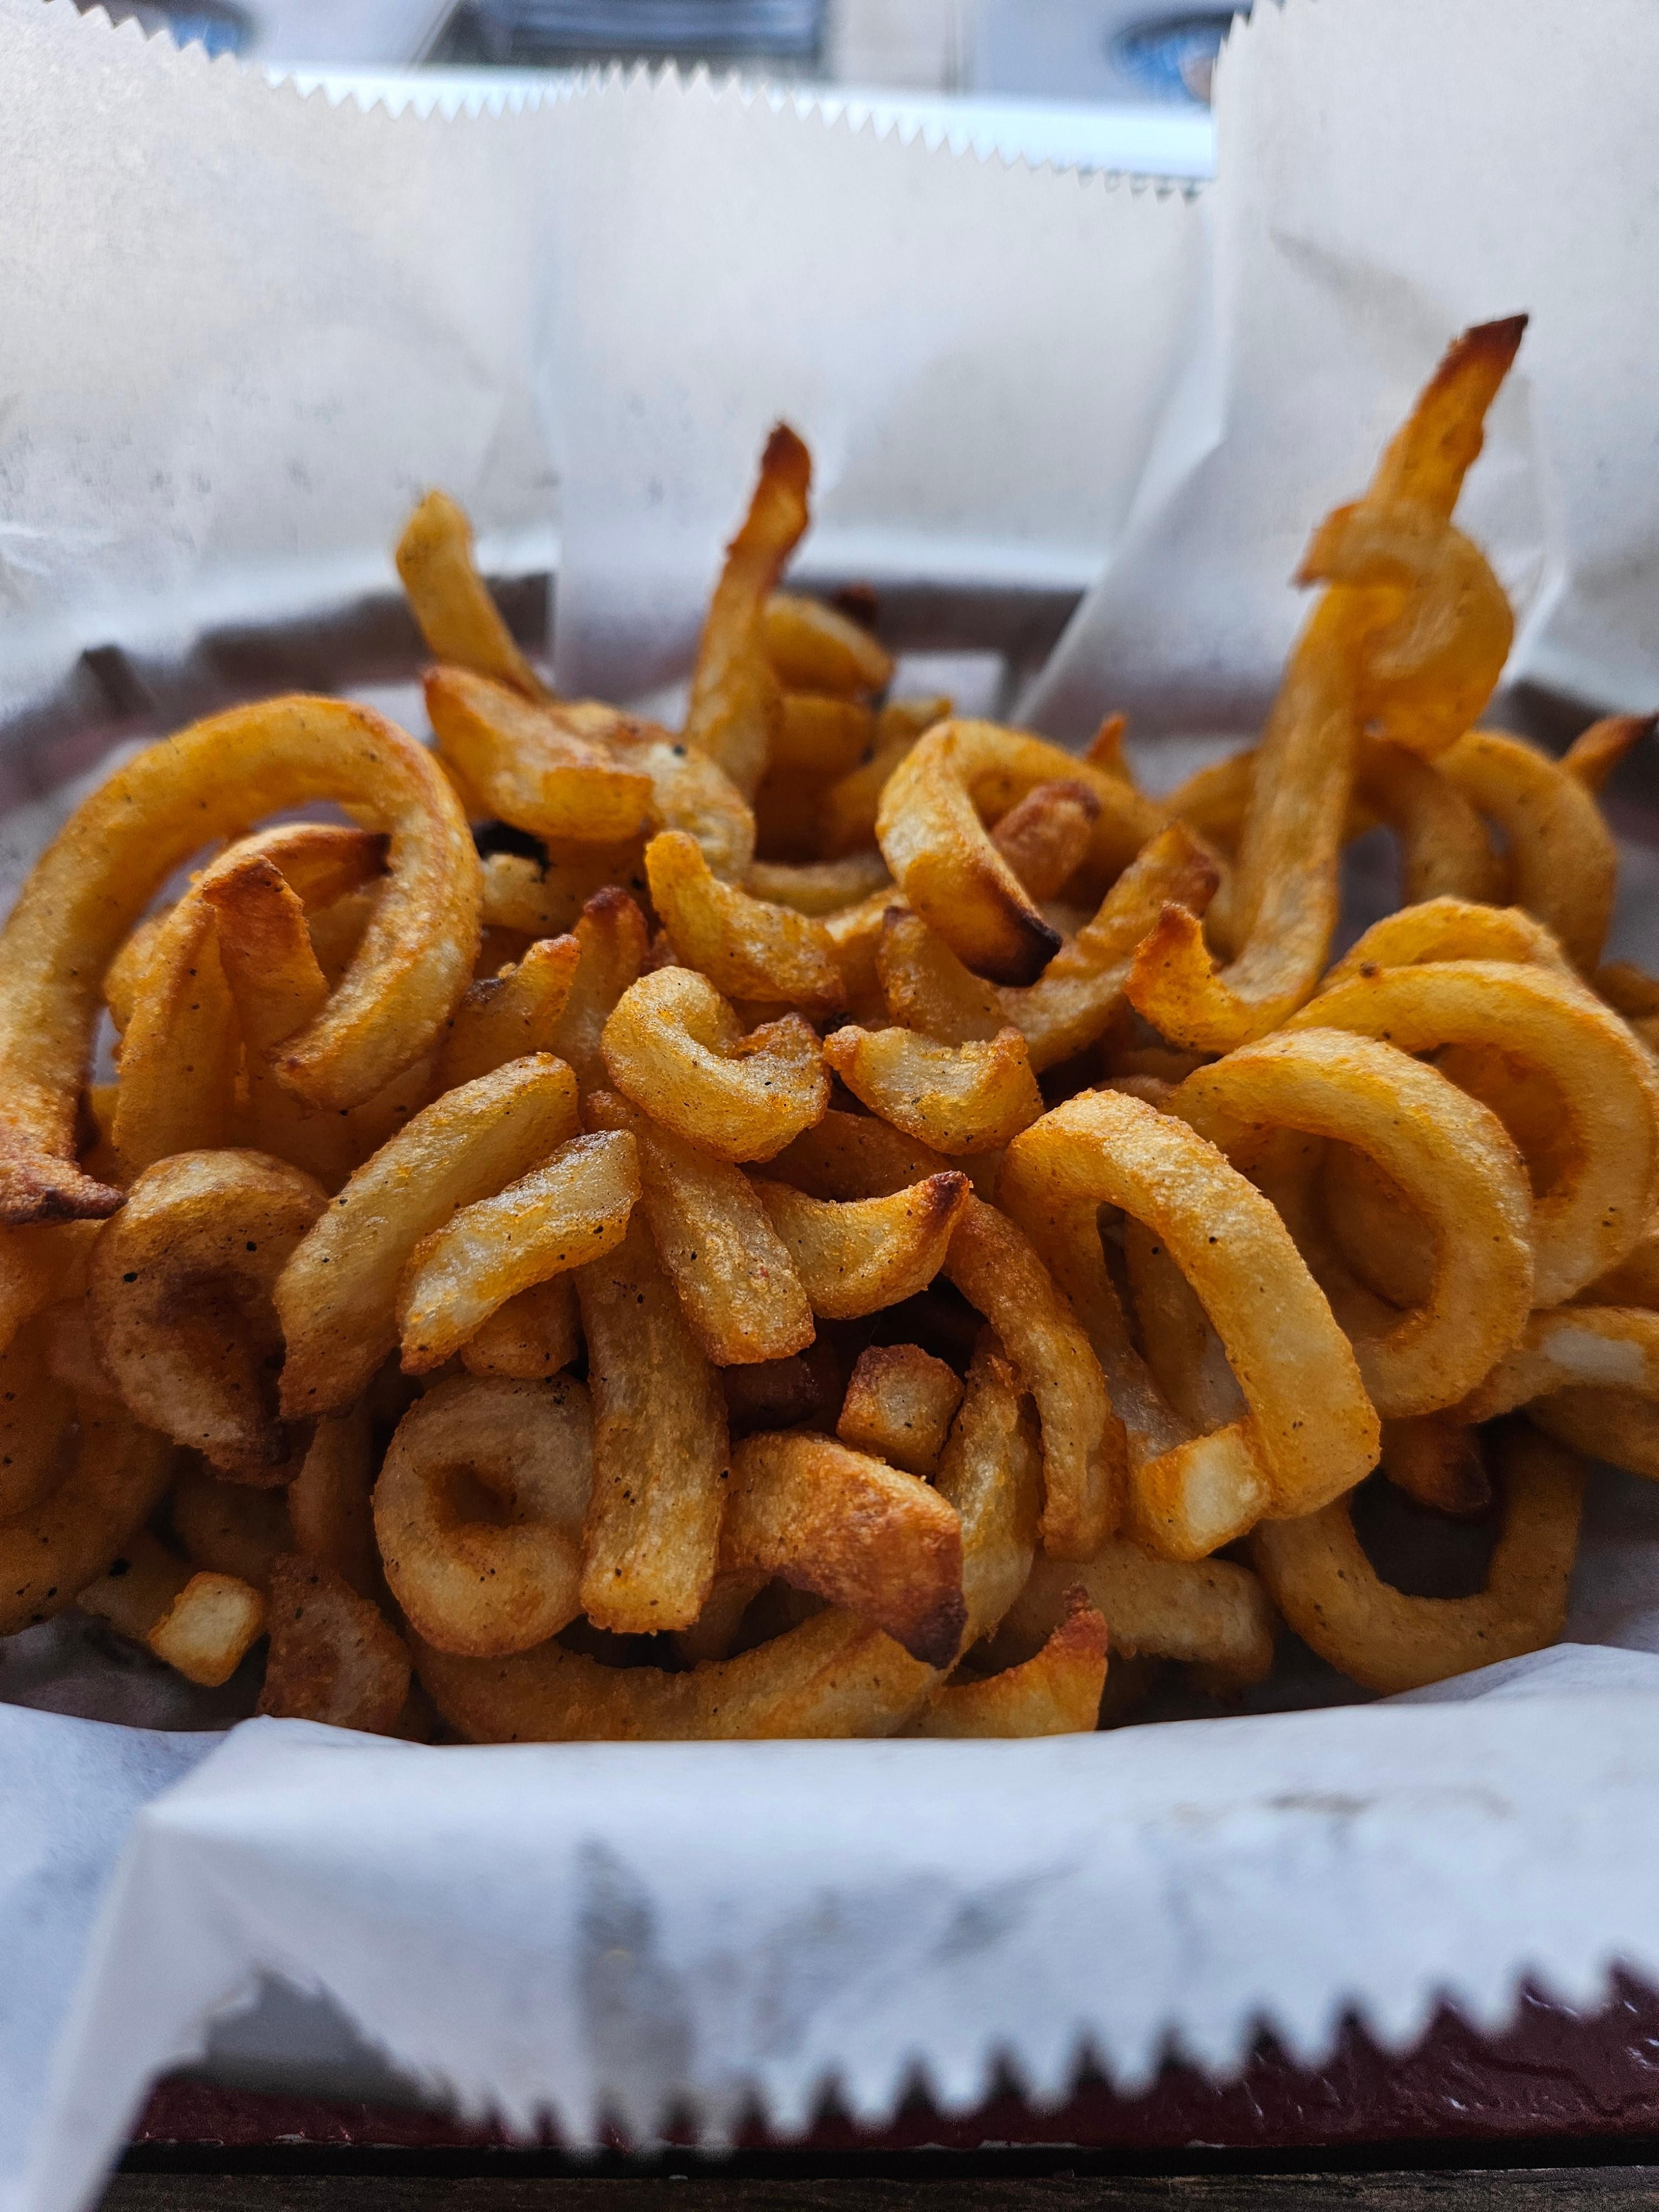 Curly Fries basket